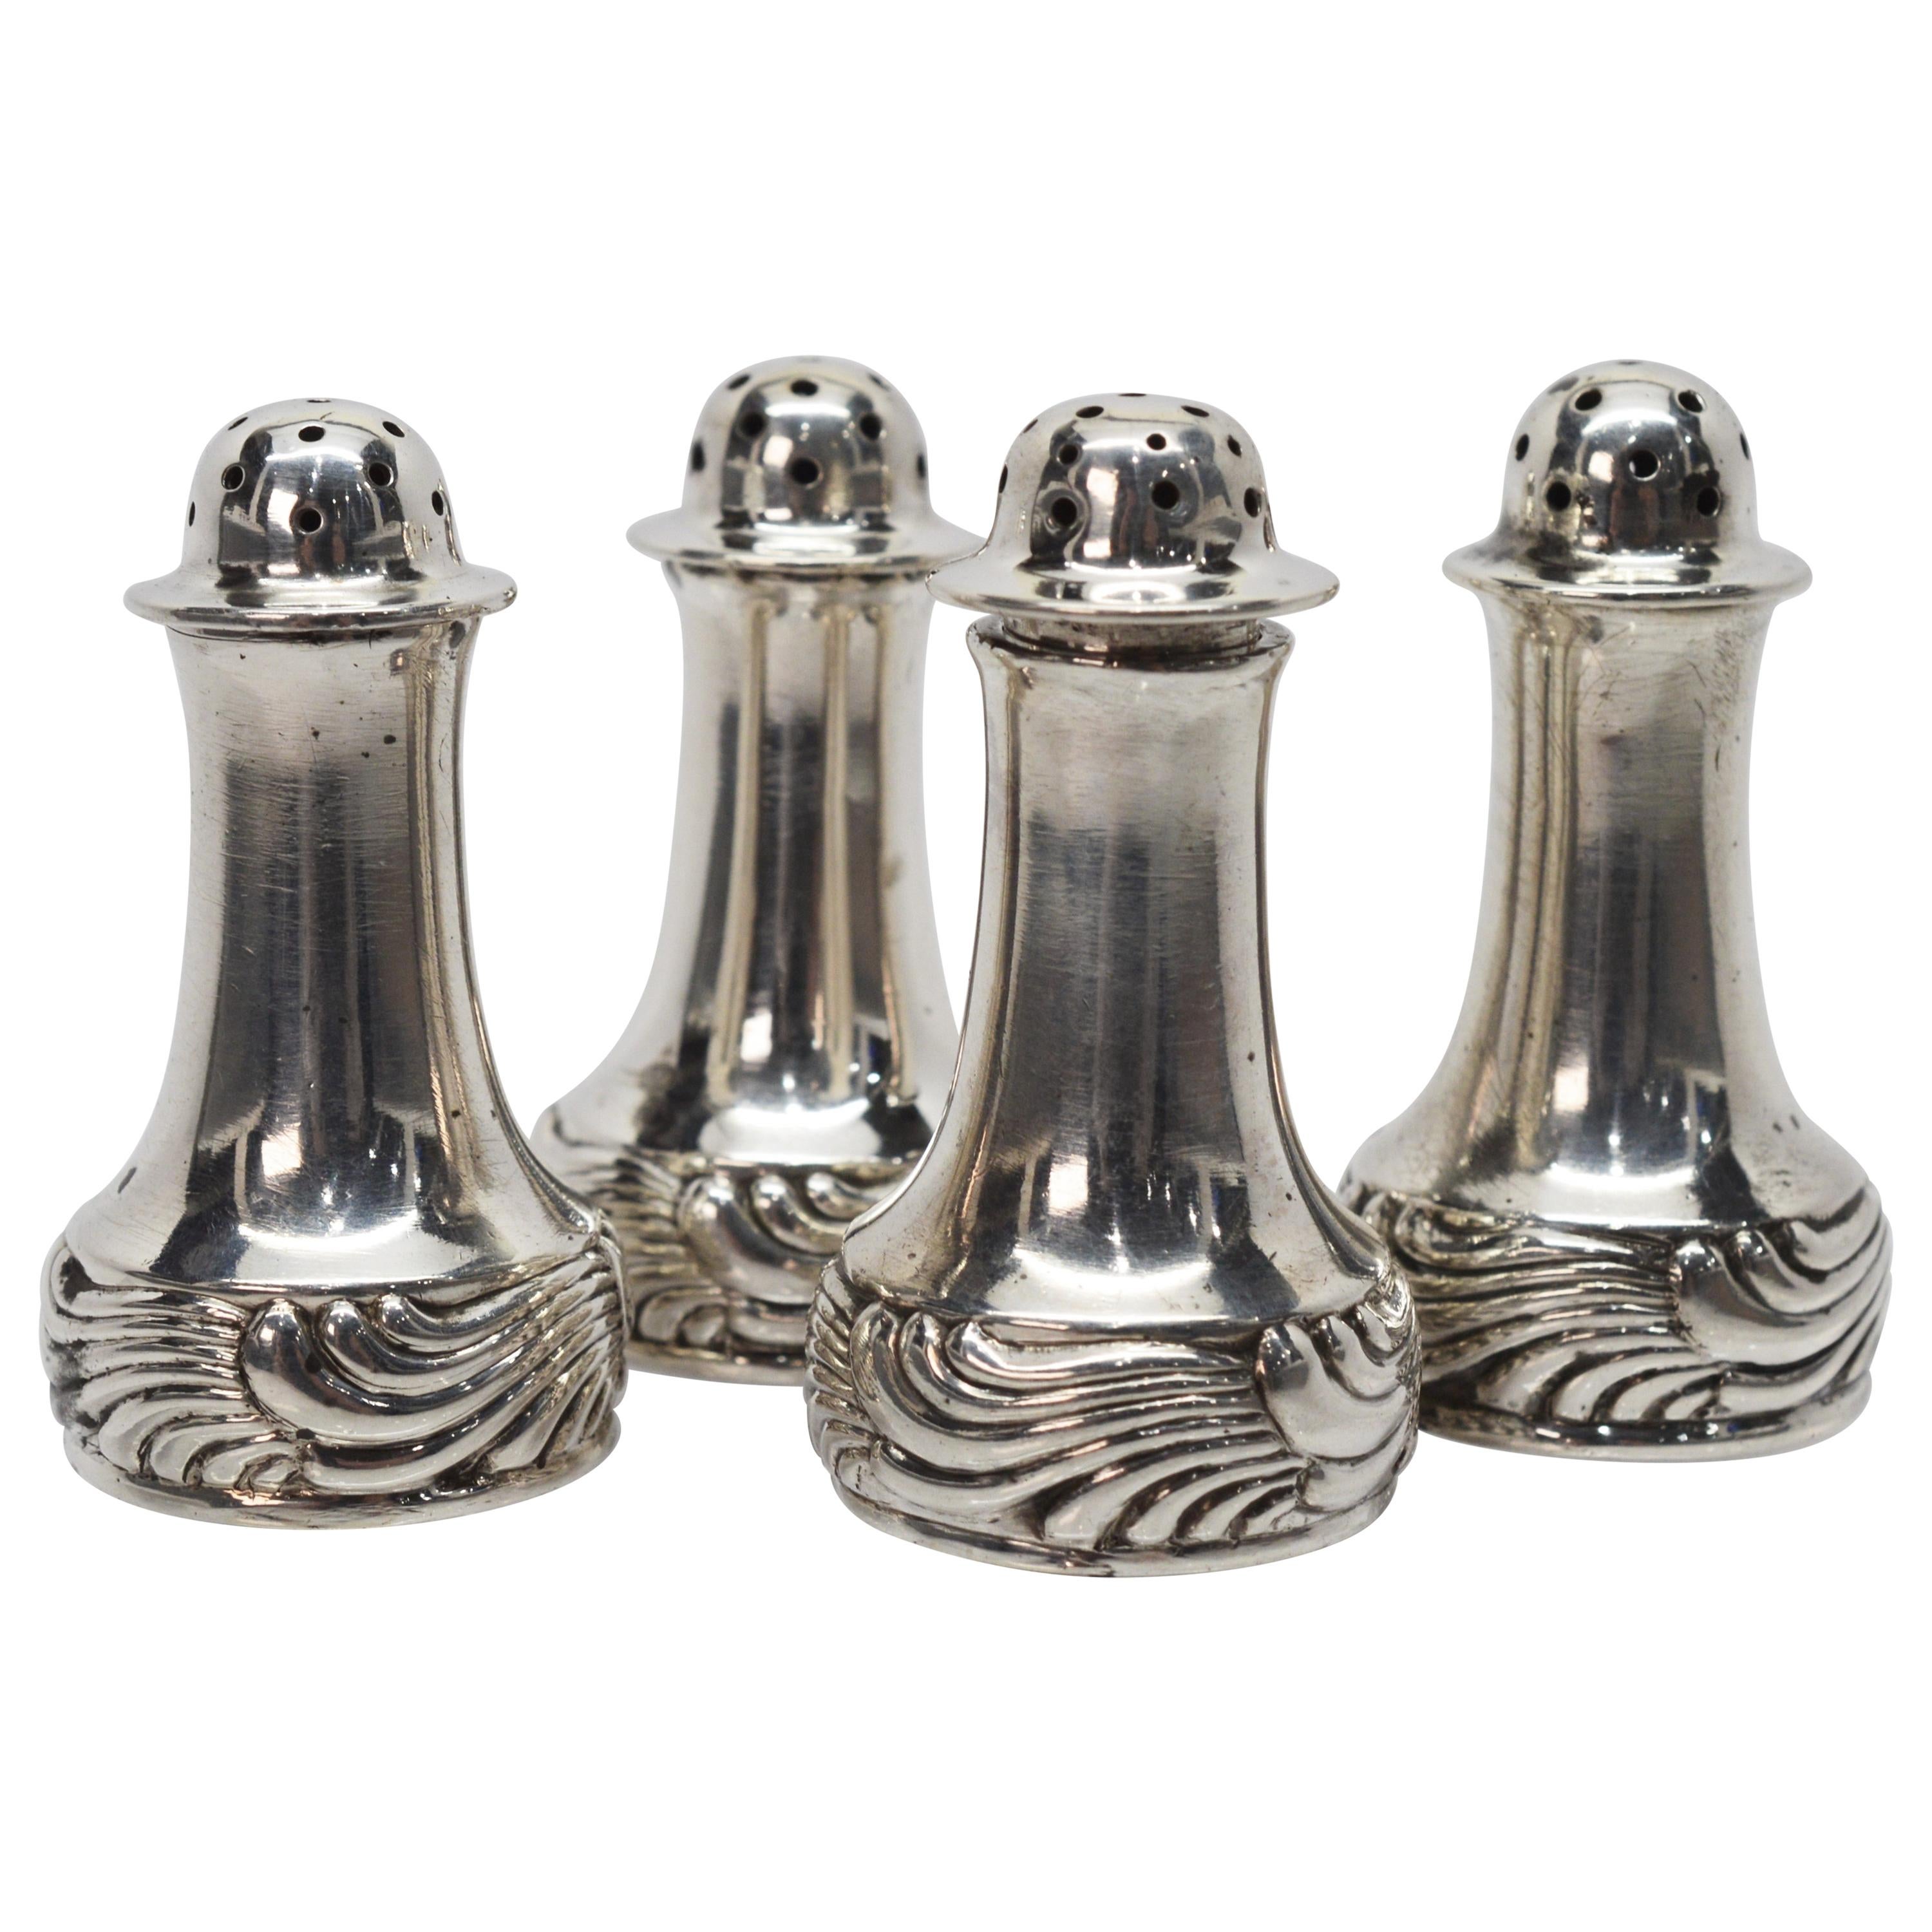 4 Tall 1970s, Pair of Vintage Silver Metal Salt and Pepper Shakers